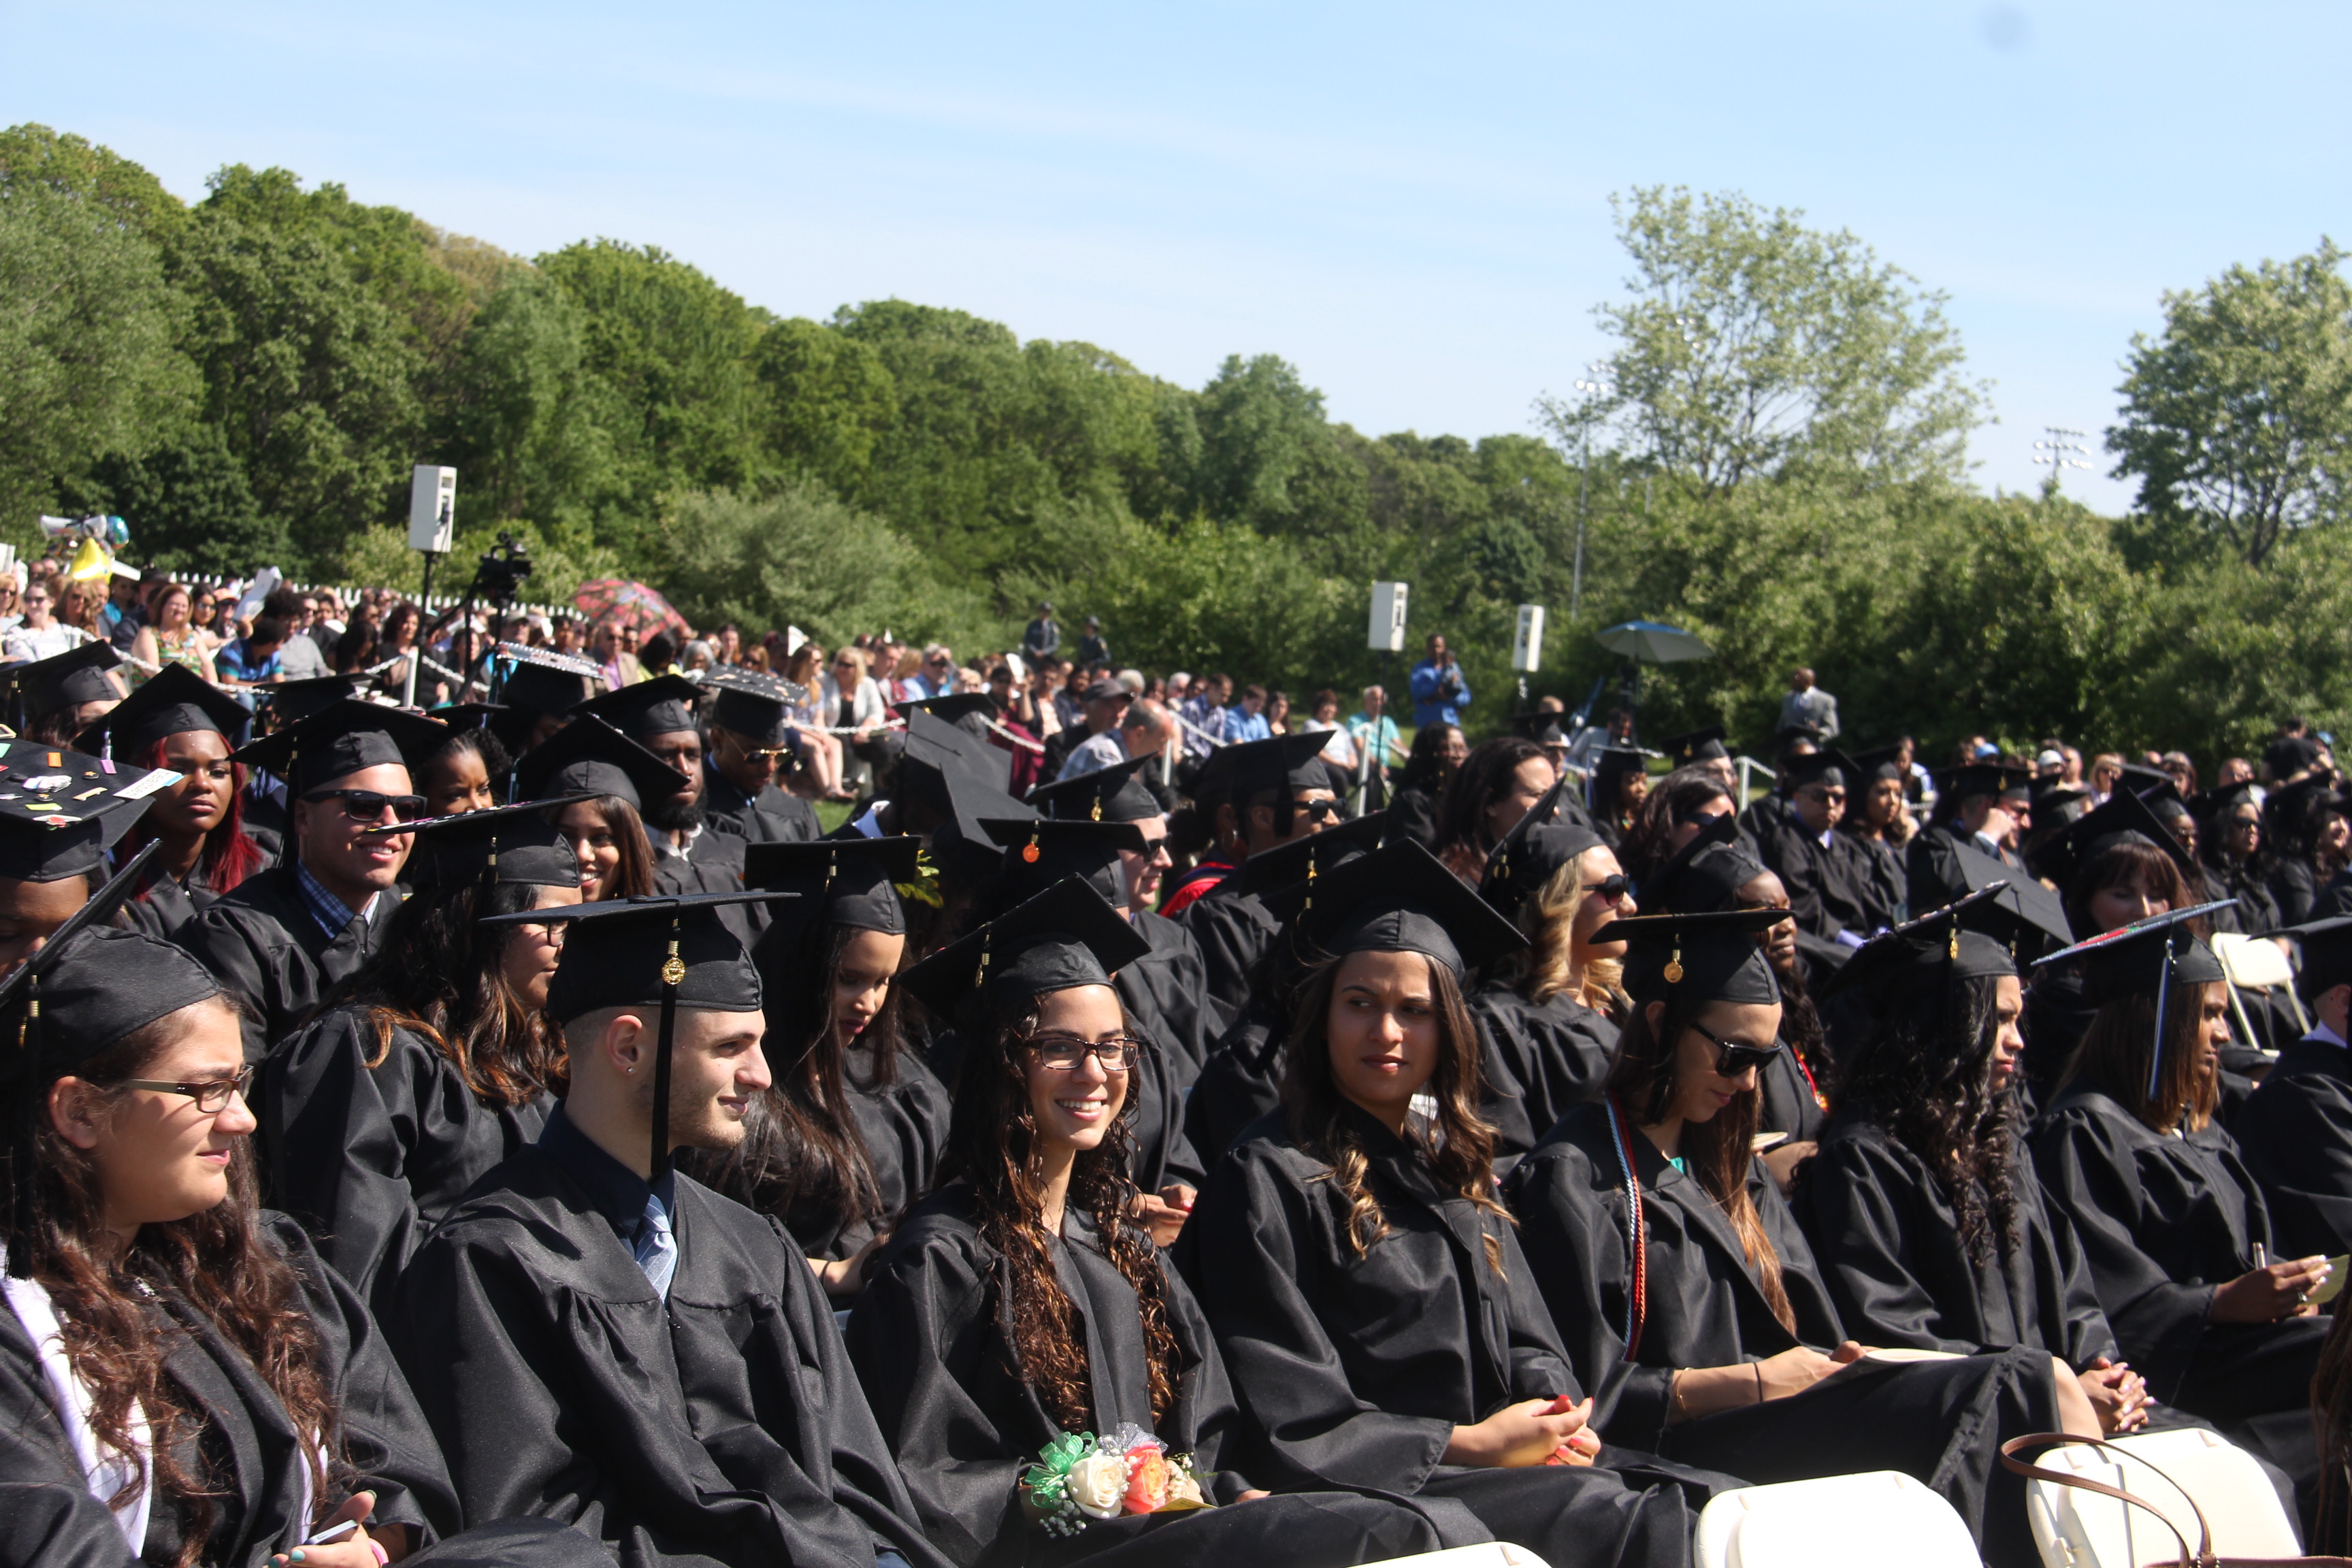 51st Commencement of SUNY Old Westbury - Schools of Business, Education, and Professional Studies